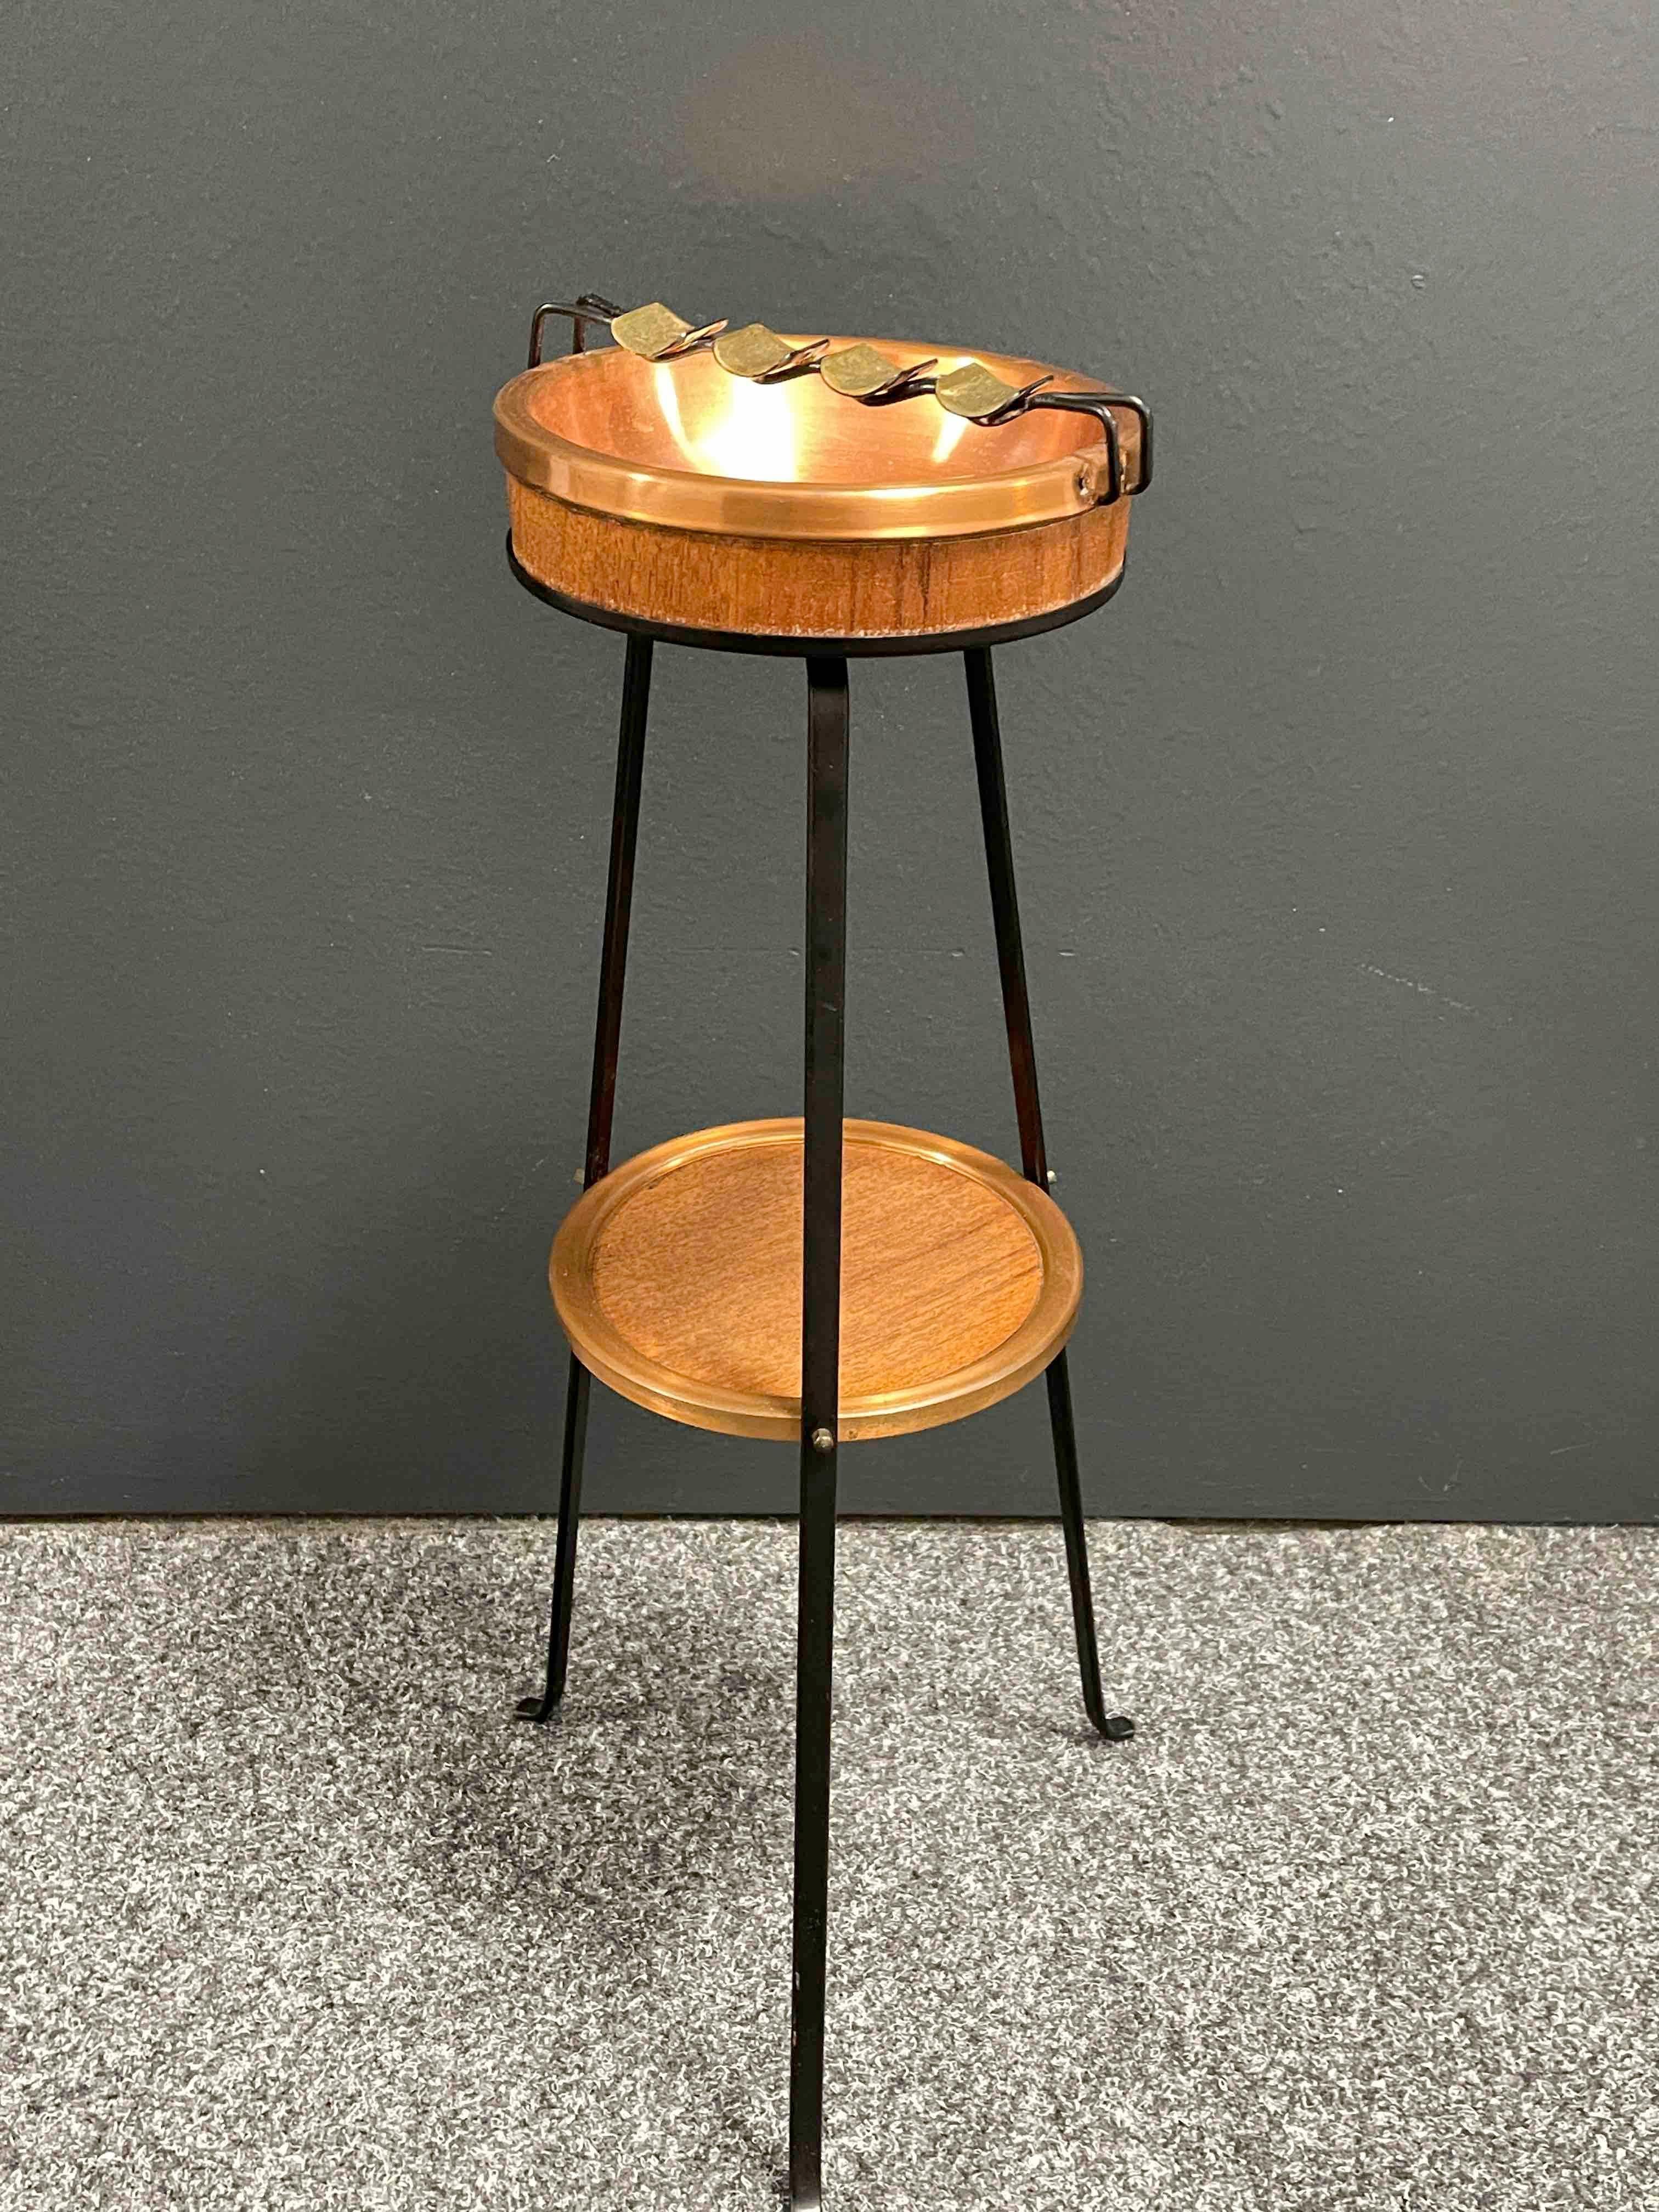 Wonderful metal ashtray element made in Europe in the 1960s. 1960s fabrication of copper, wood, with a black string Stand. The ash tray has a very nice design with a fantastic and hard to find tripod Stand. This item remains in a good vintage